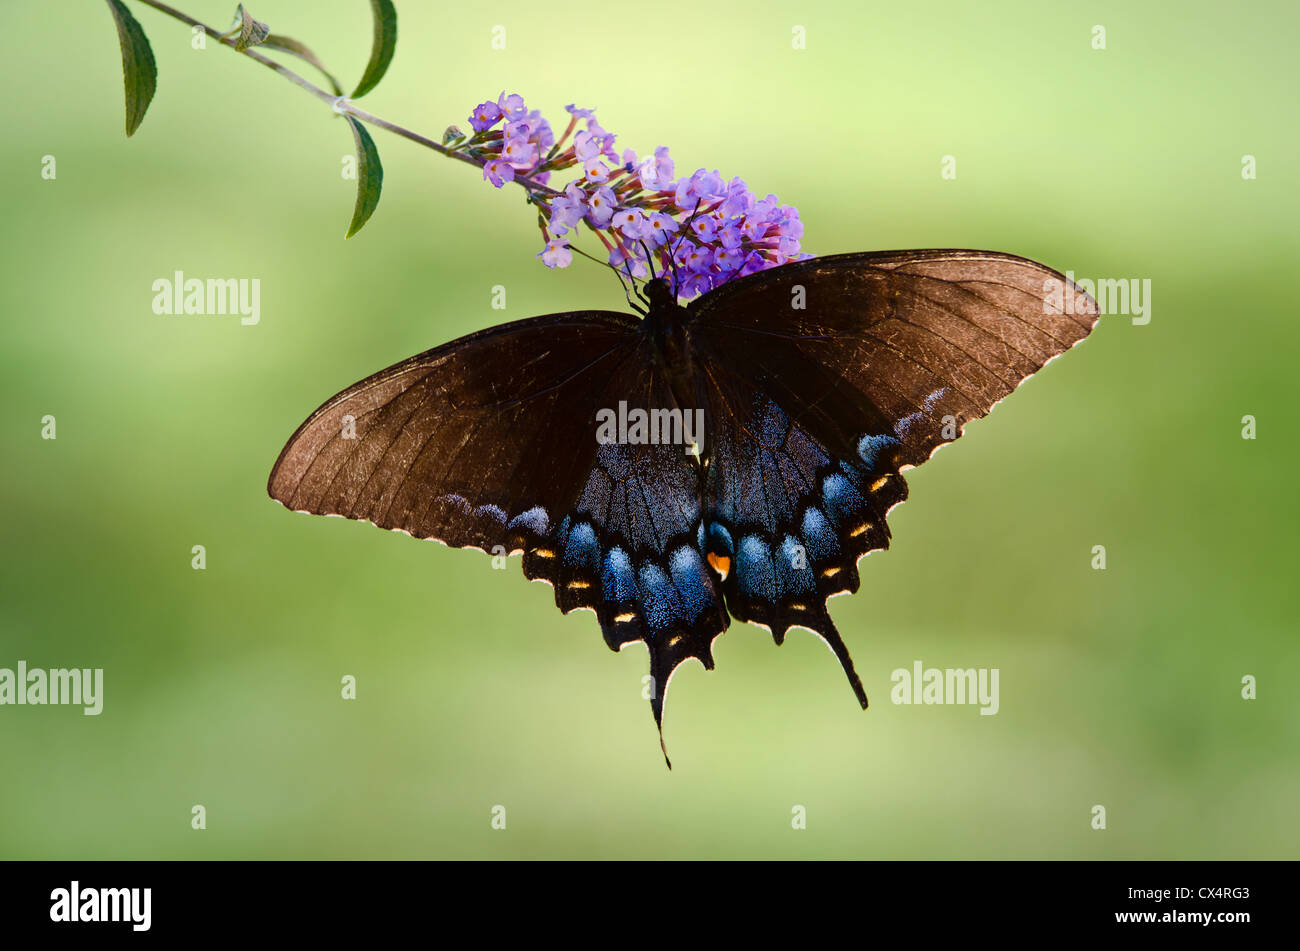 Eastern Tiger Swallowtail butterfly (Papilio glaucus) on butterfly bush flower Stock Photo